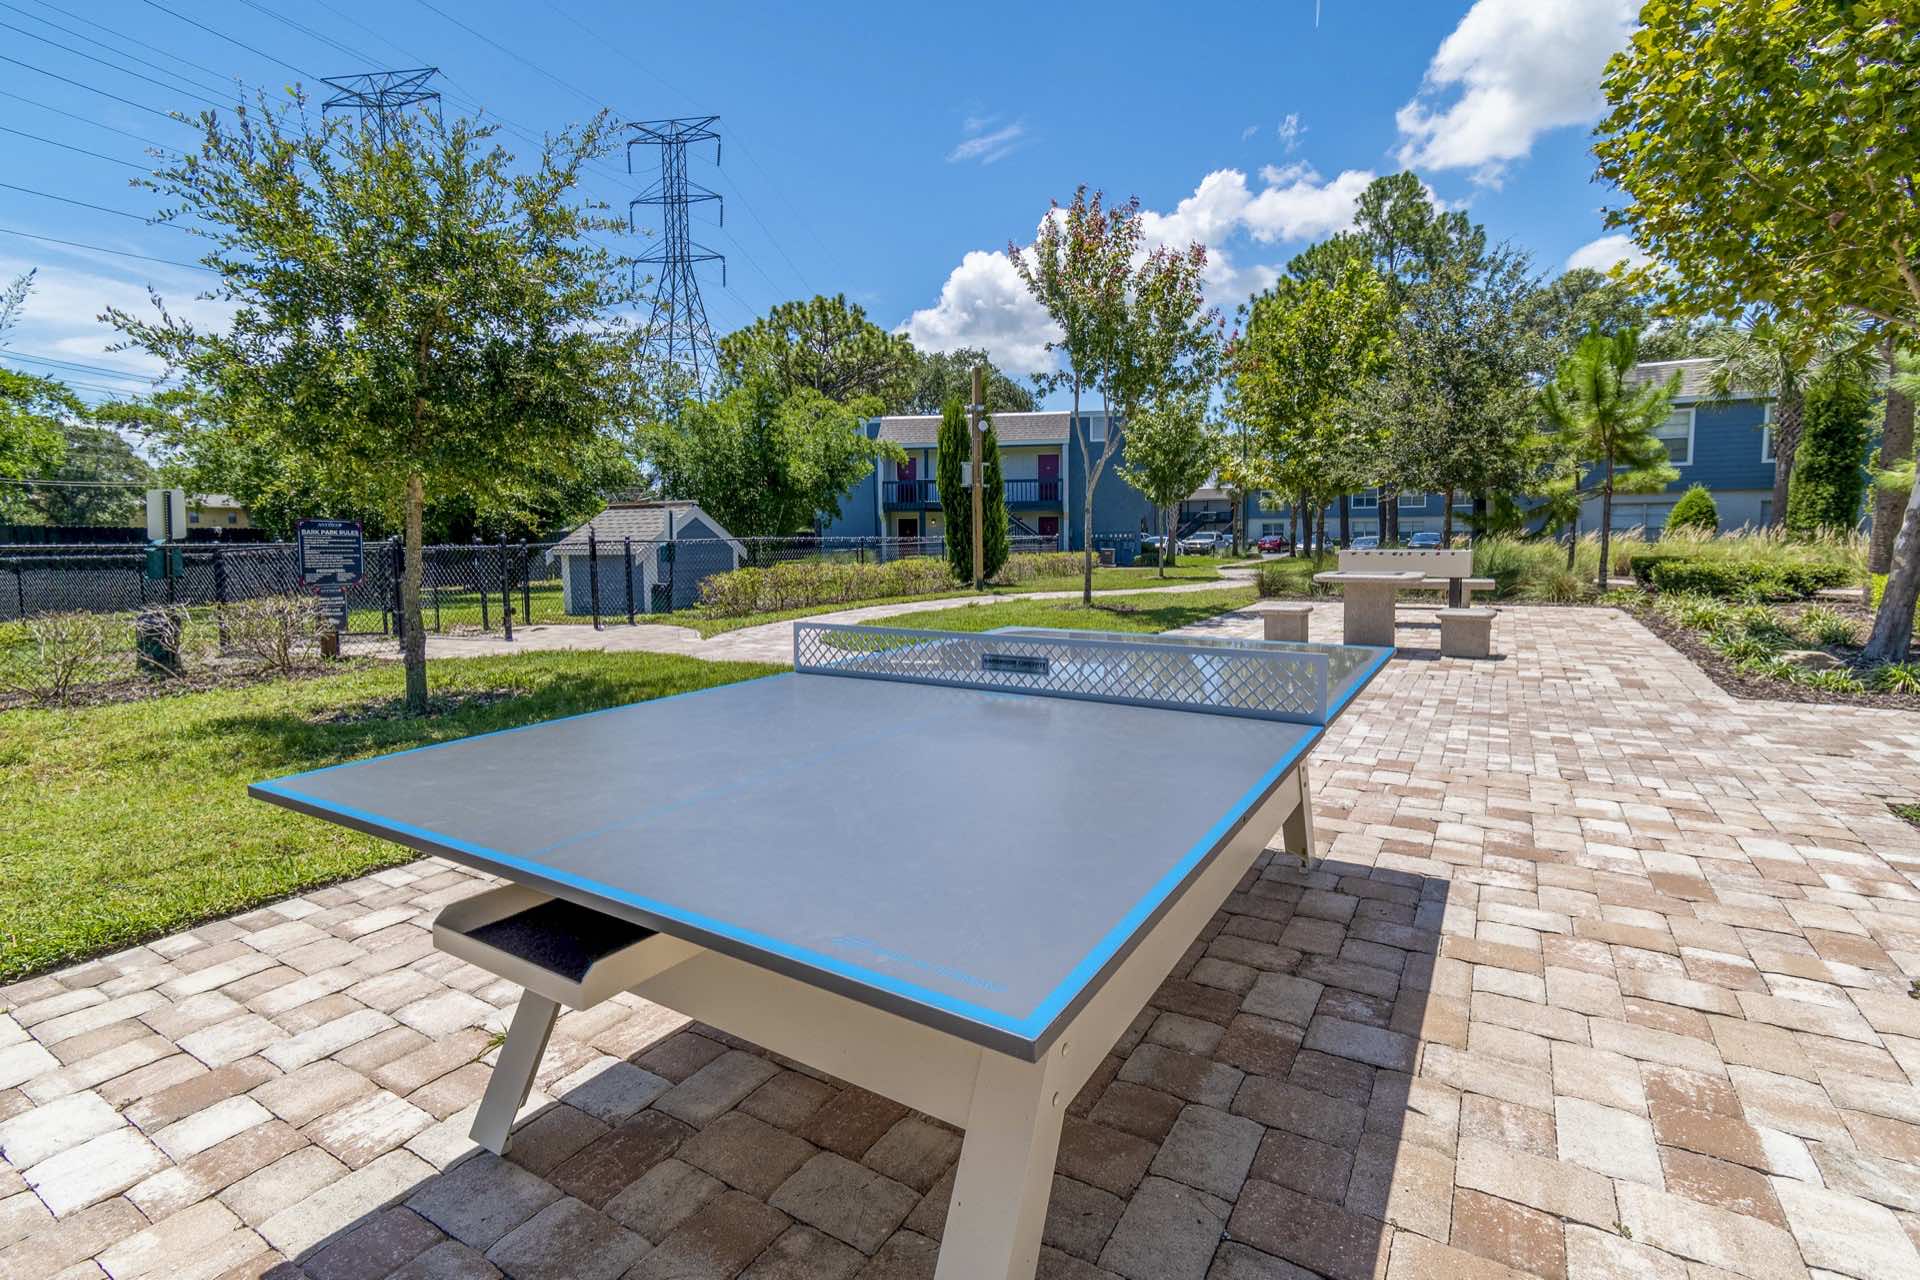 close-up photo of ping-pong table in outdoor game area